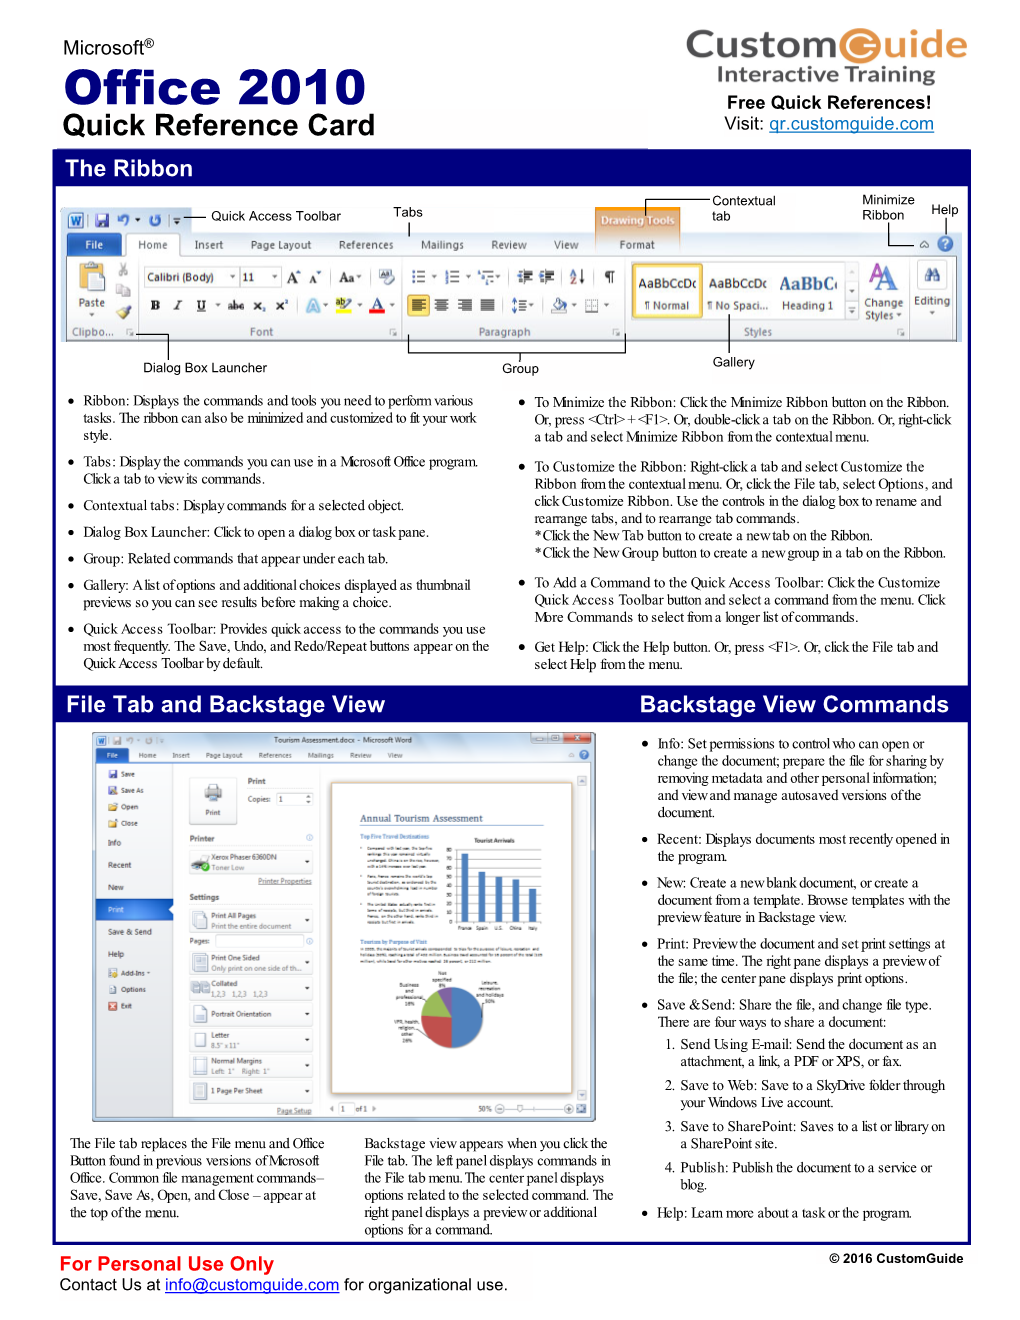 Office 2010 Quick Reference